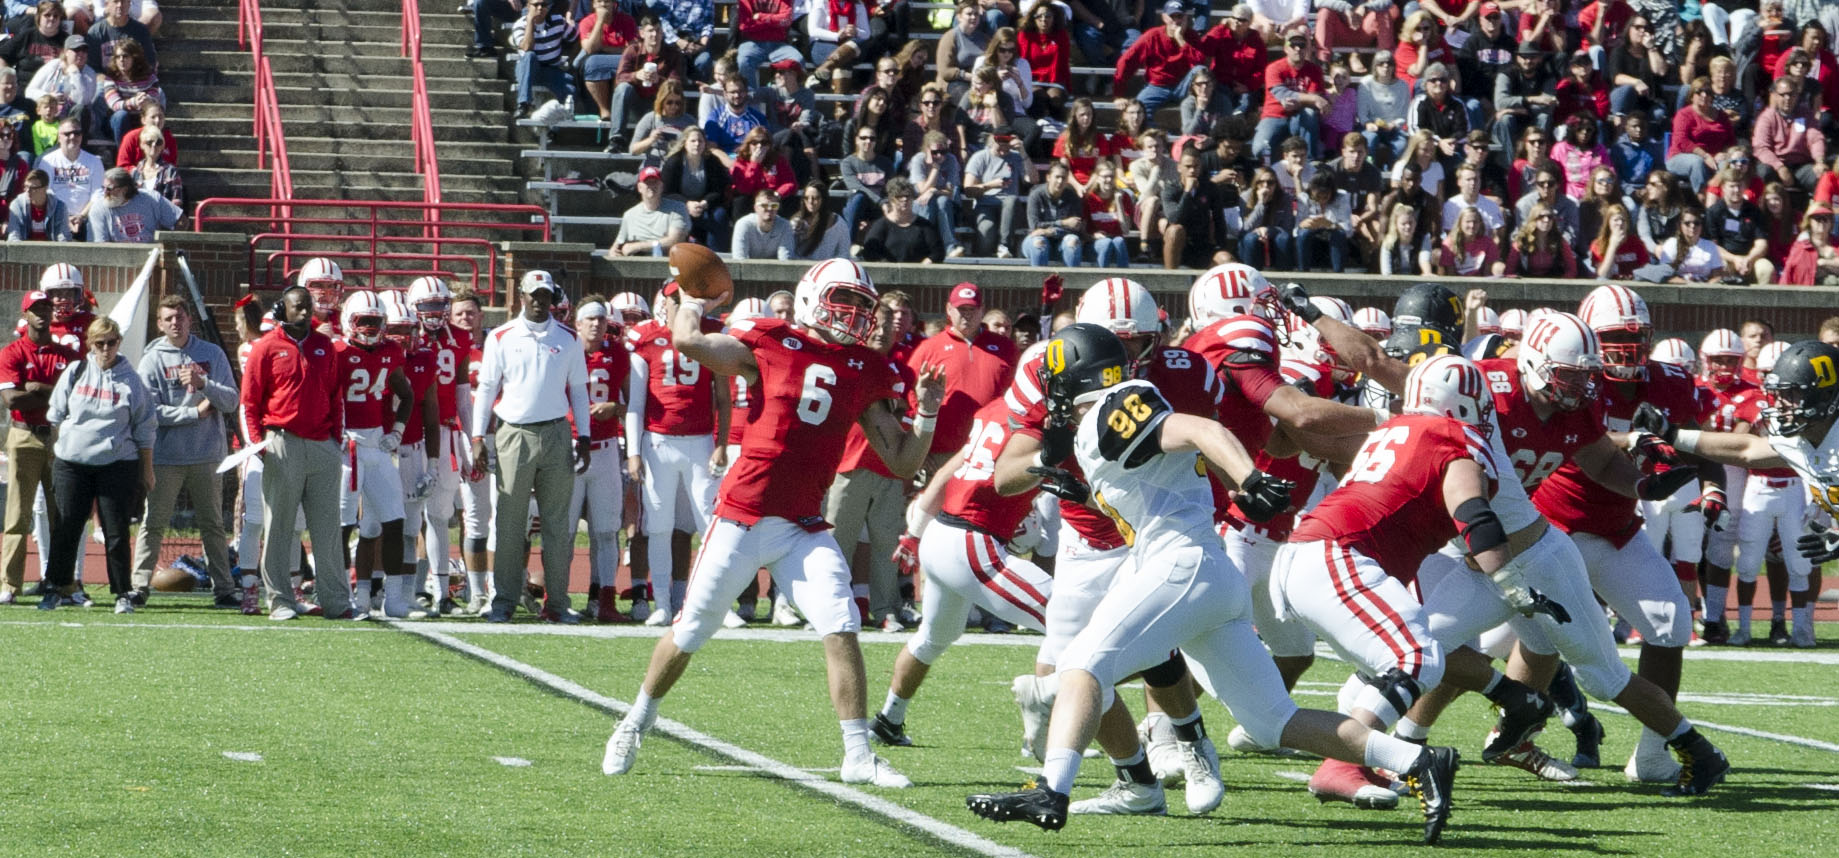 #15 Wittenberg Outlasts DePauw 21-10 on Homecoming to Move to 5-0